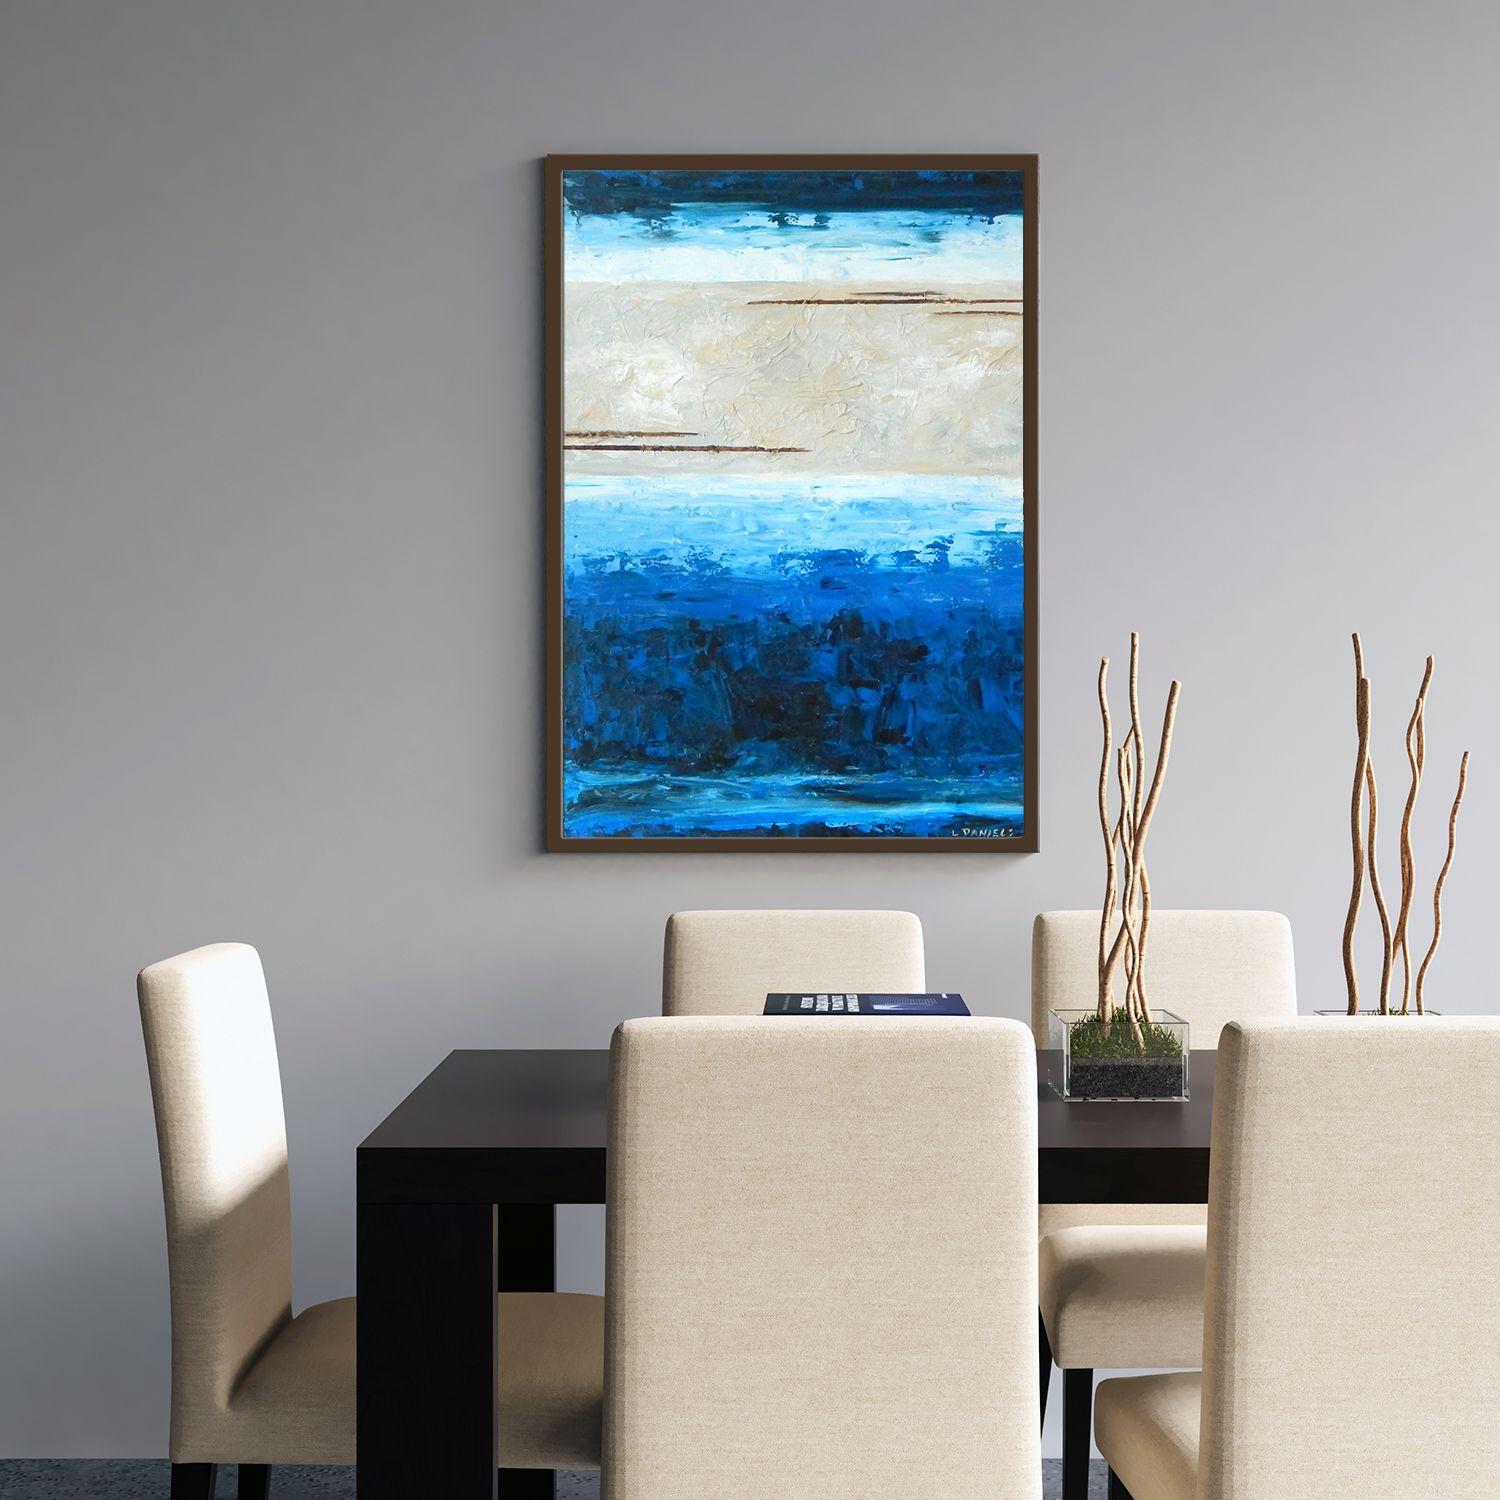 Blue Danube - the painting - inspired by the waltz - inspired by the poem! Simplicity at its best, a cool rich blue addition to decor brings it all together! :: Painting :: Abstract :: This piece comes with an official certificate of authenticity